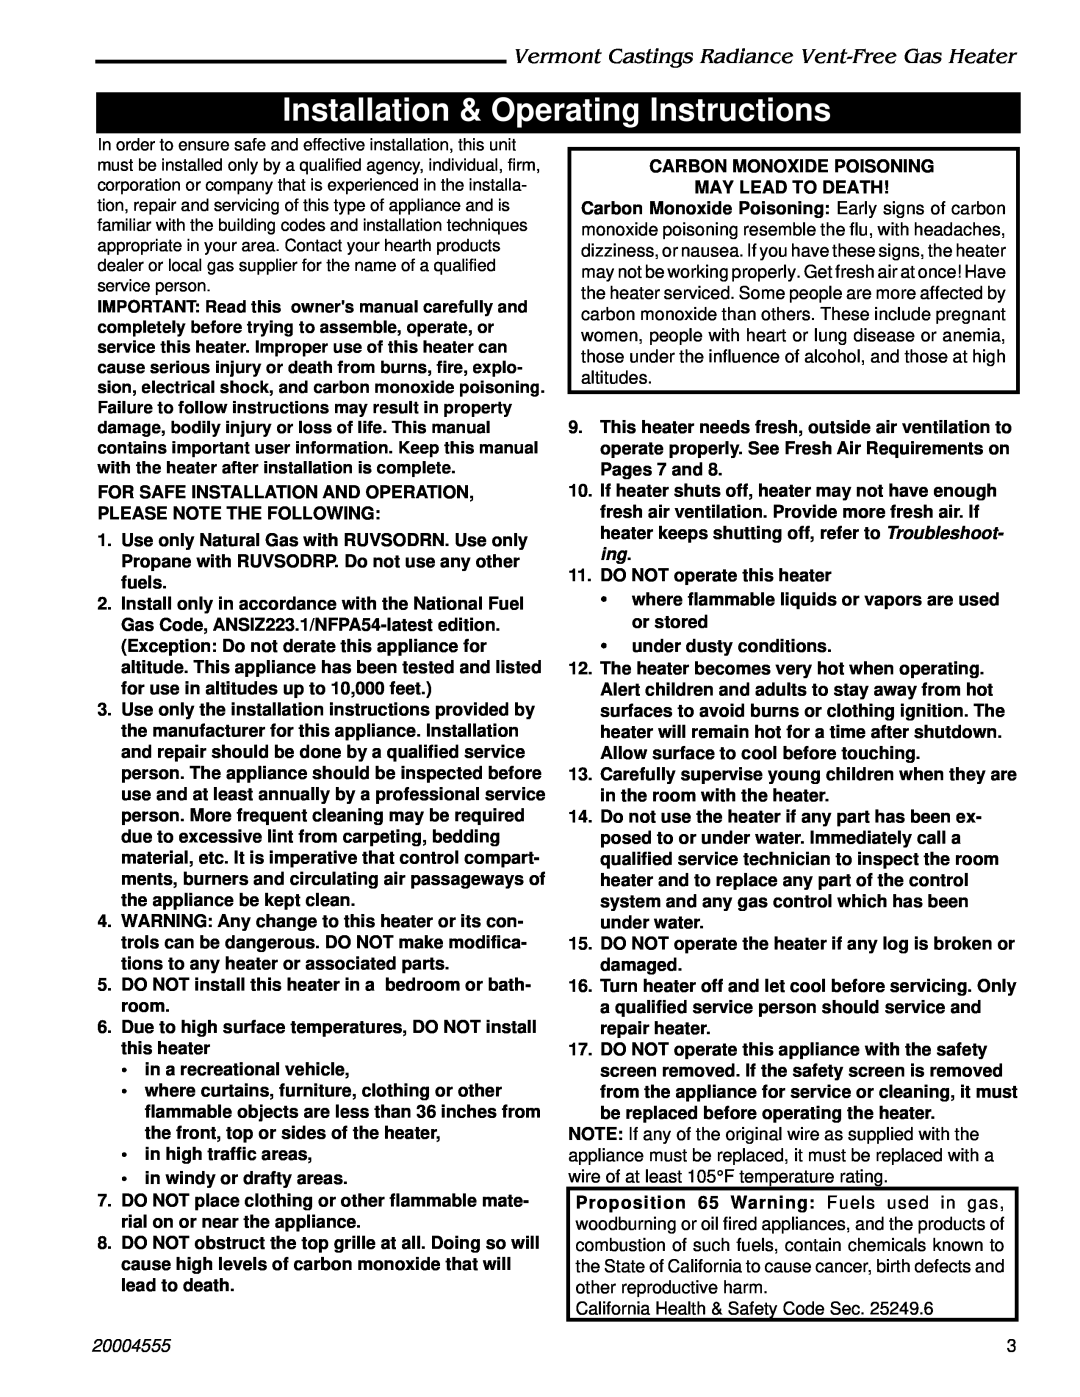 Majestic Appliances 3376 Installation & Operating Instructions, Vermont Castings Radiance Vent-FreeGas Heater, 20004555 